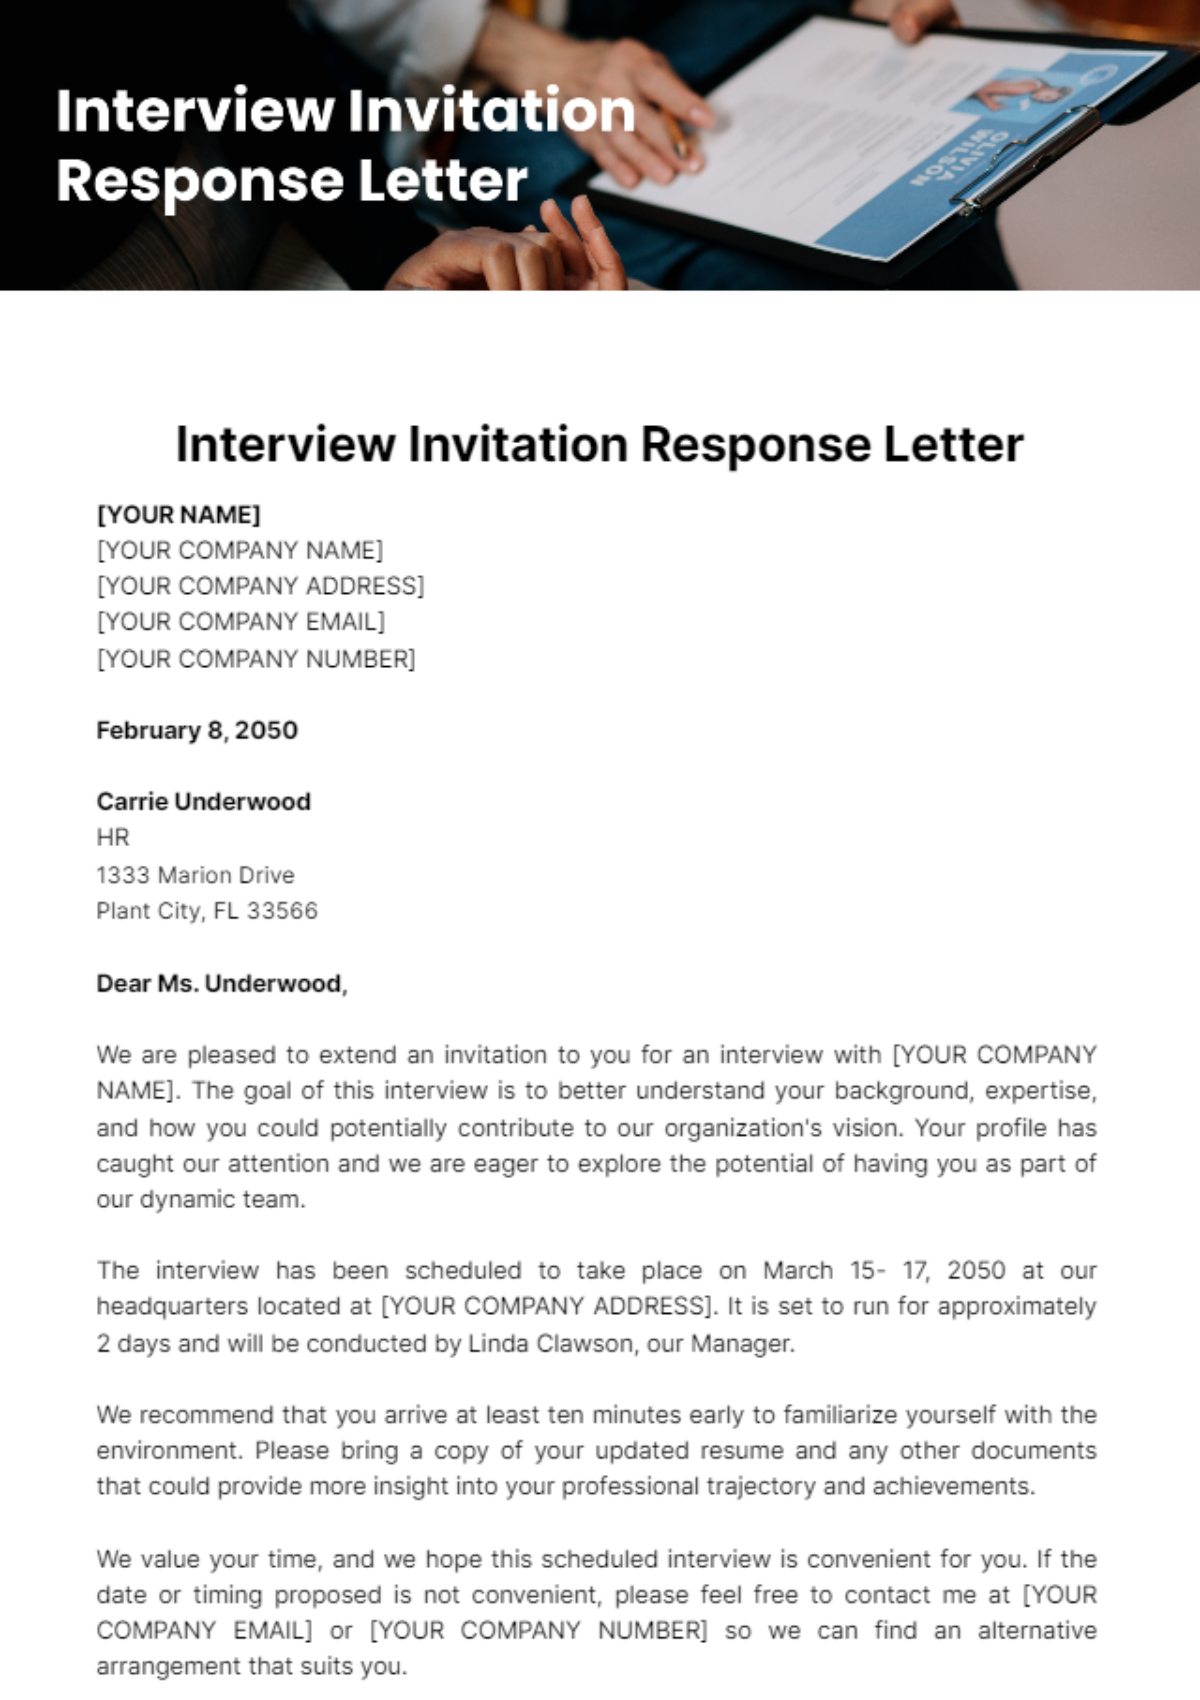 Free Interview Invitation Response Letter Template